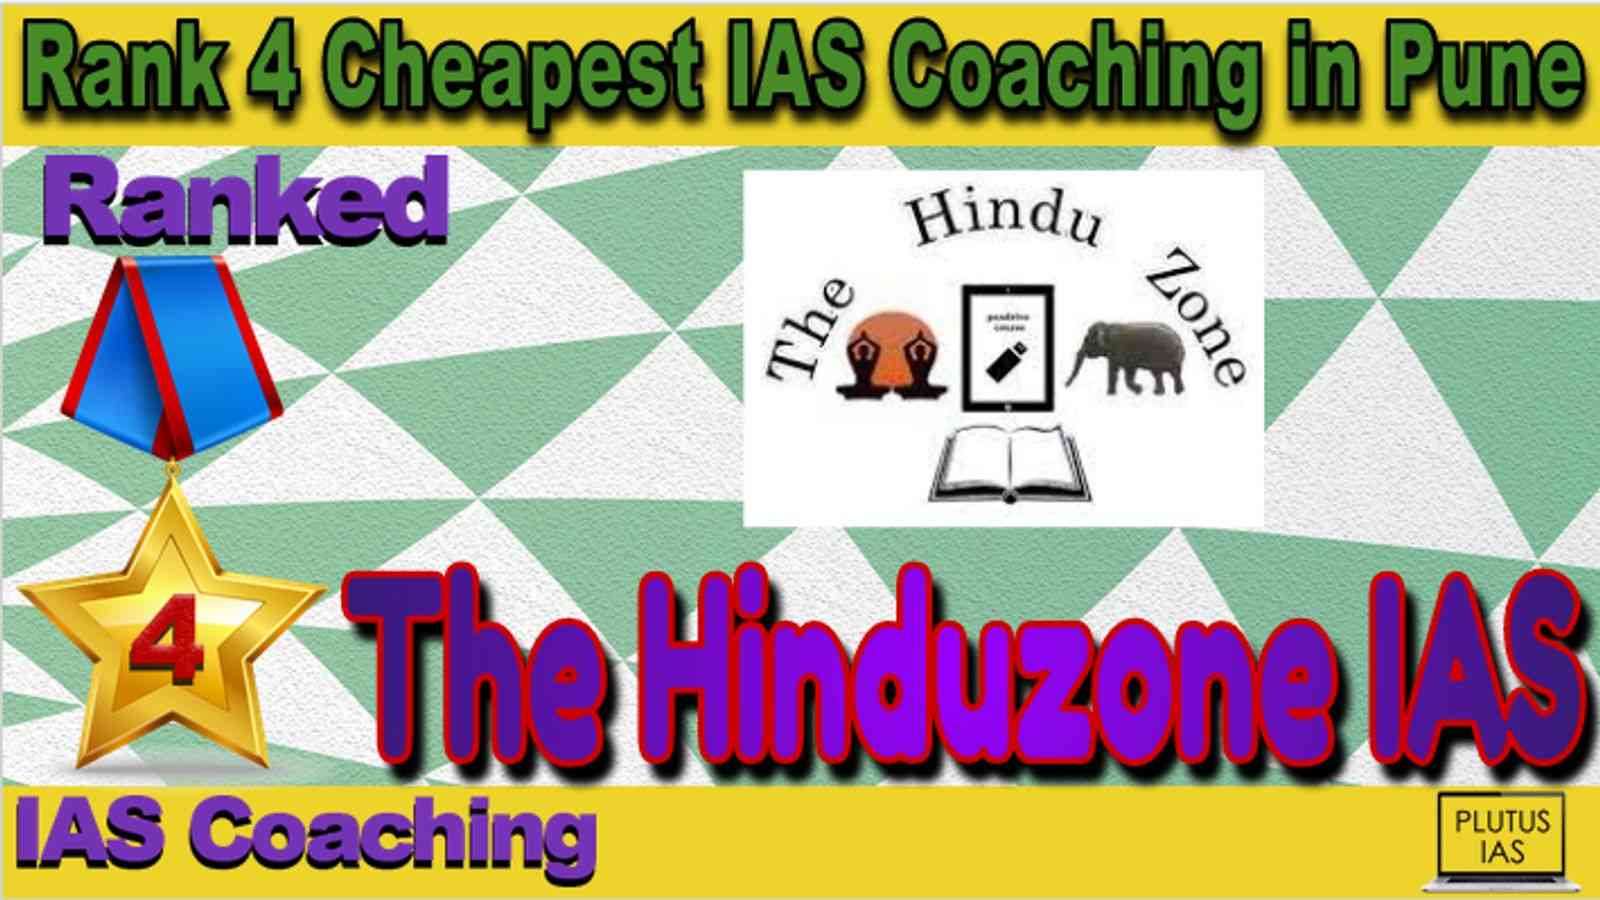 Rank 4 Cheapest IAS Coaching in Pune